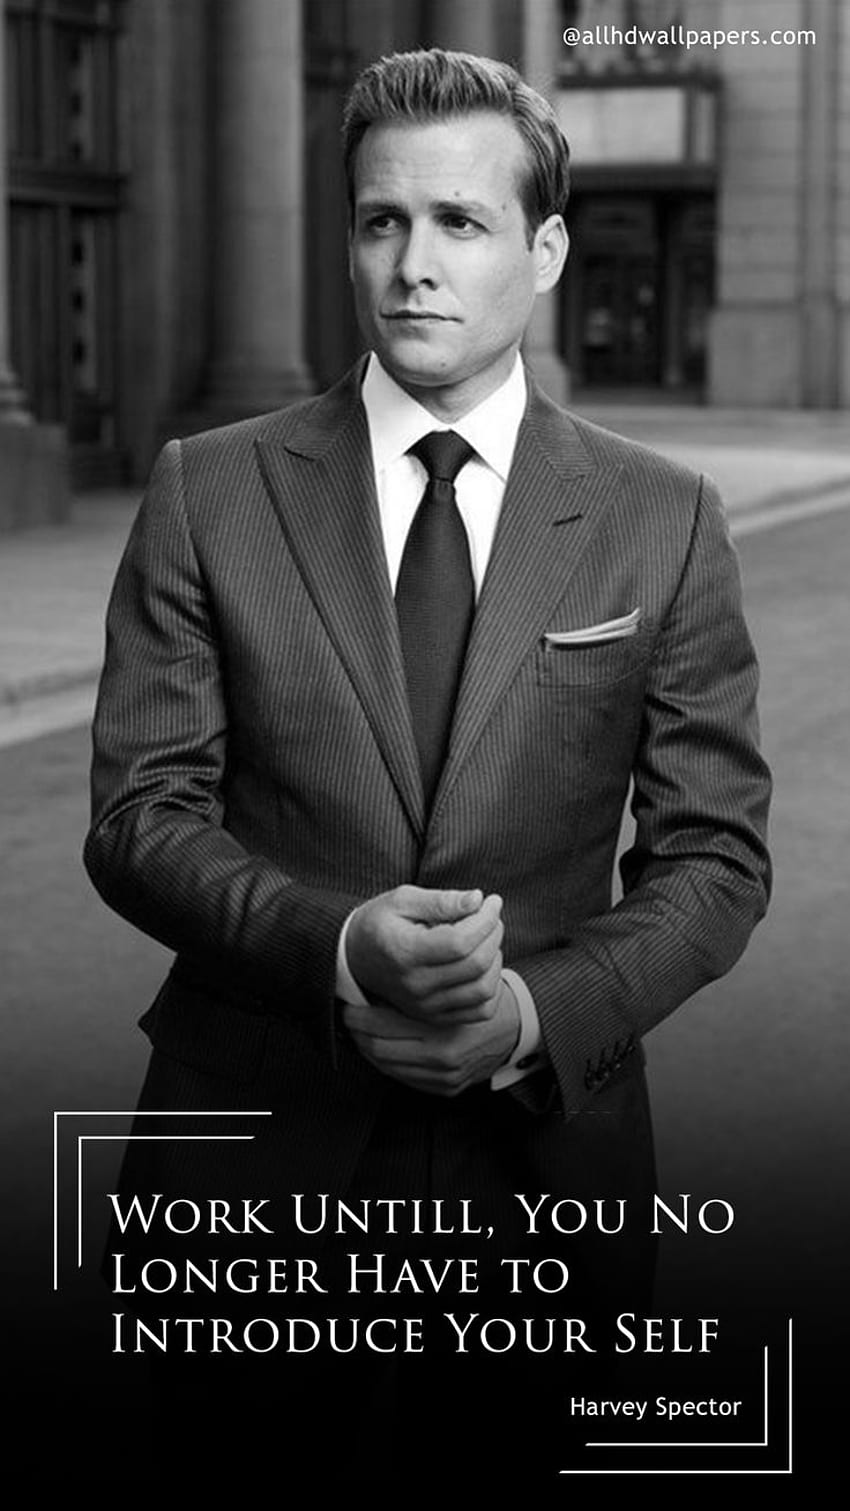 Harvey Specter Quotes will Inspire you to Work Hard. Harvey specter quotes, Suits quotes, Harvey specter suits, Harvey Spectre HD phone wallpaper